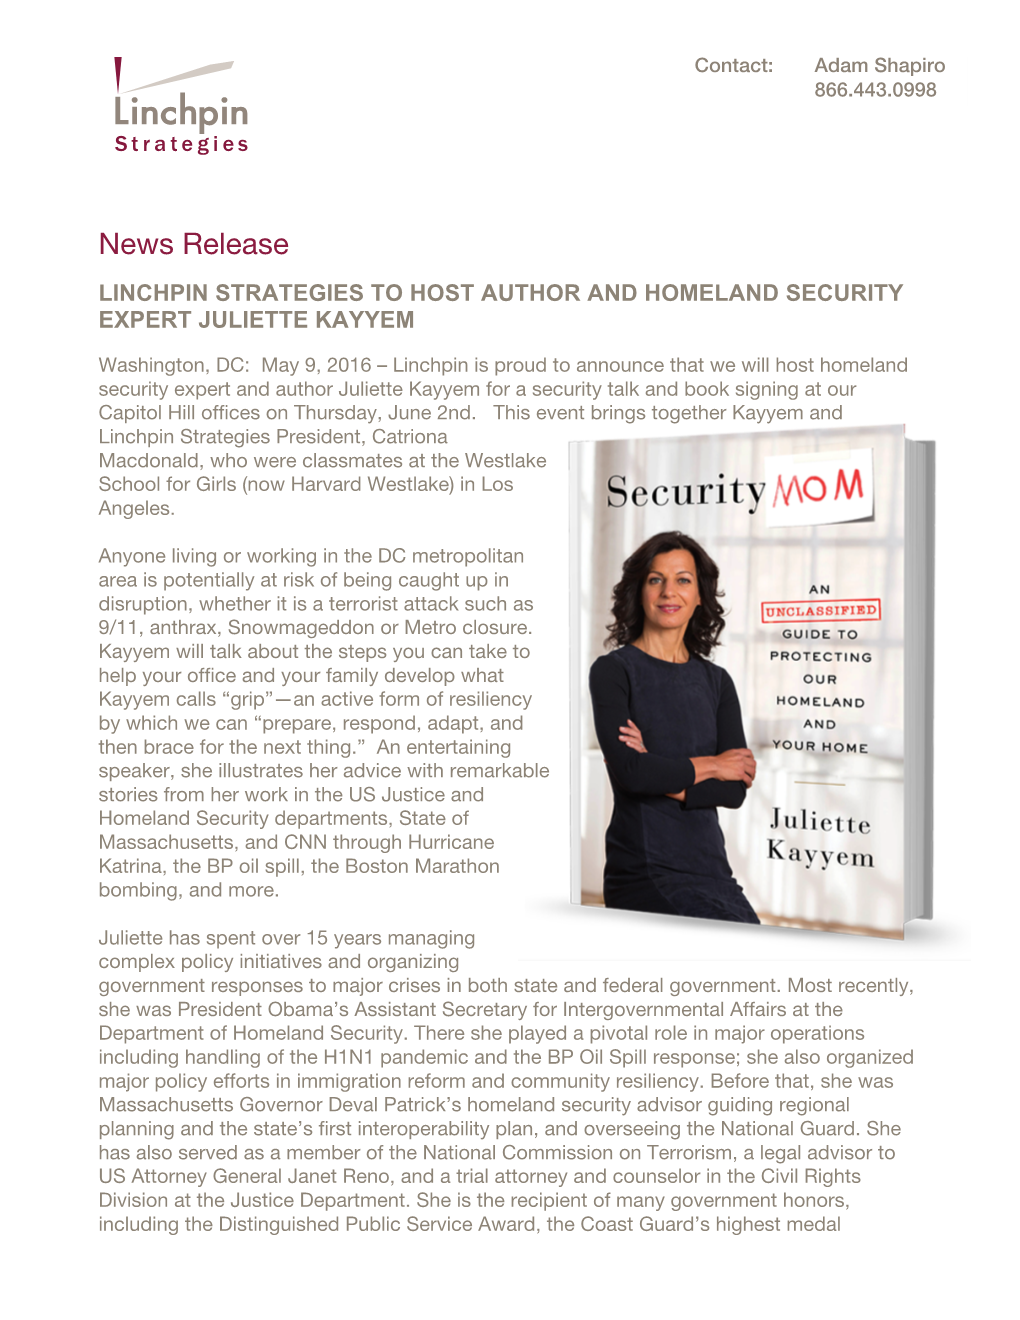 News Release LINCHPIN STRATEGIES to HOST AUTHOR and HOMELAND SECURITY EXPERT JULIETTE KAYYEM